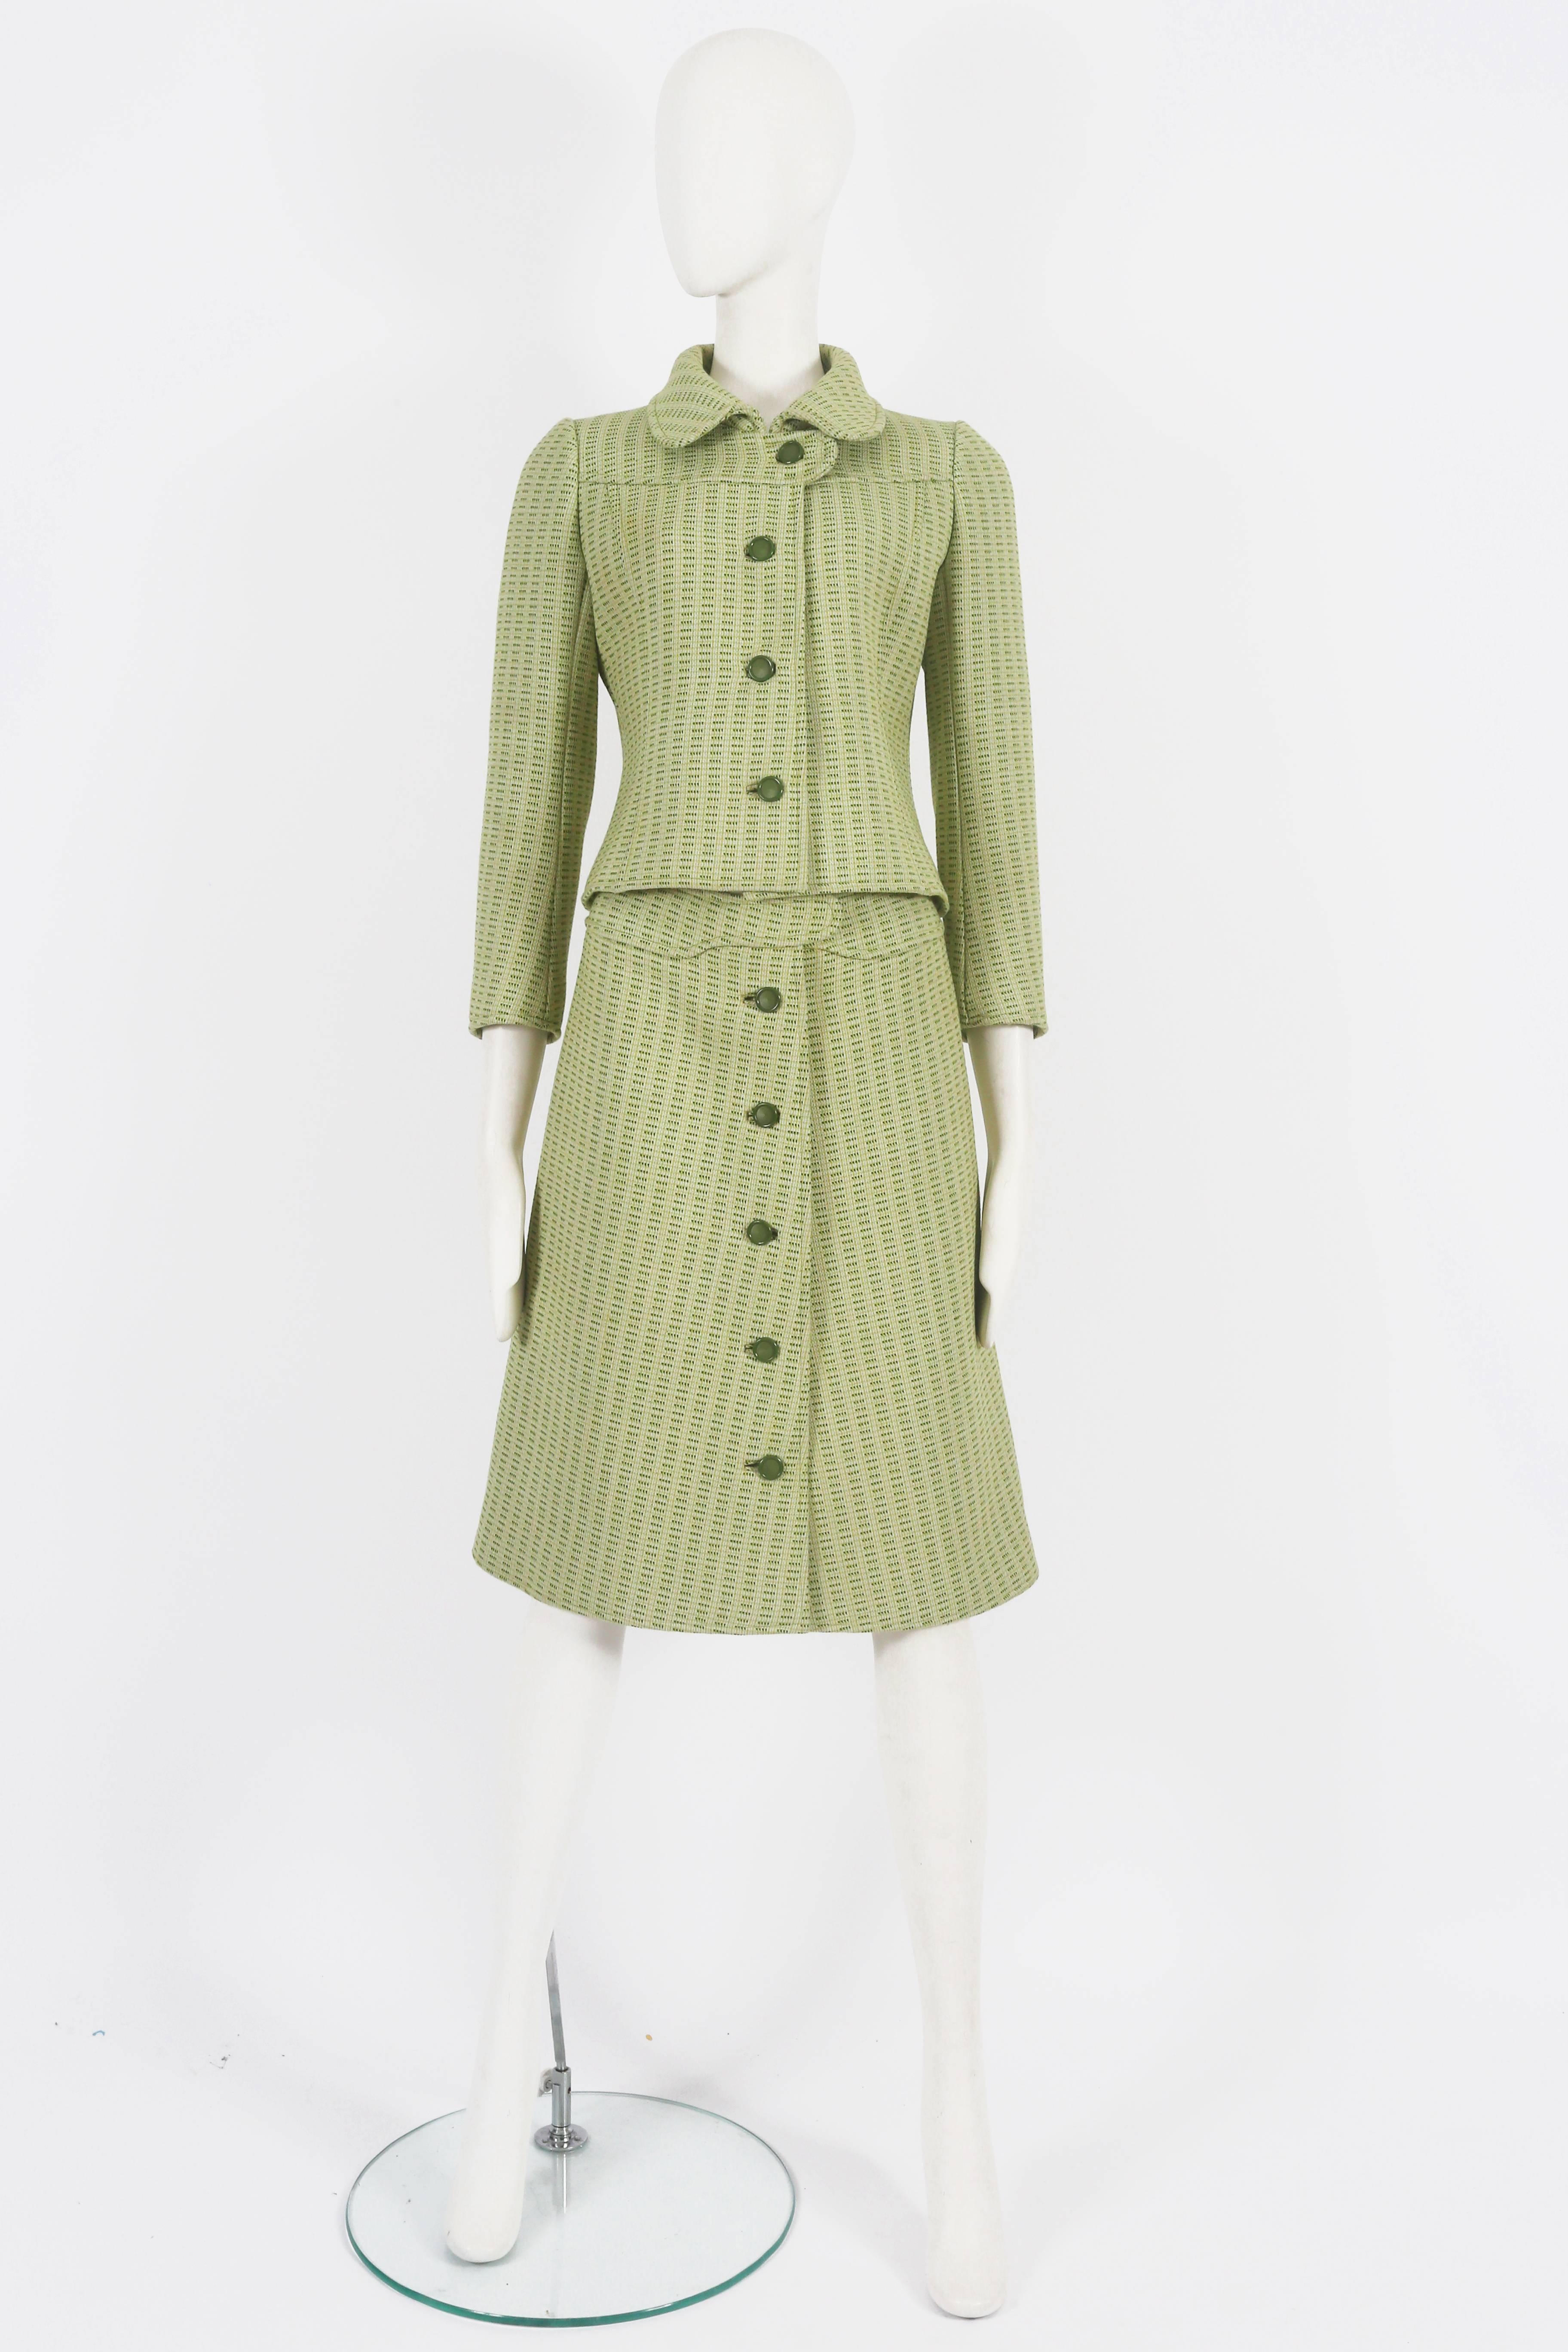 Presenting a fine and rare Haute Couture Courreges skirt suit, a timeless treasure dating back to circa 1969. This exquisite suit showcases impeccable tailoring and attention to detail, truly embodying the essence of haute couture